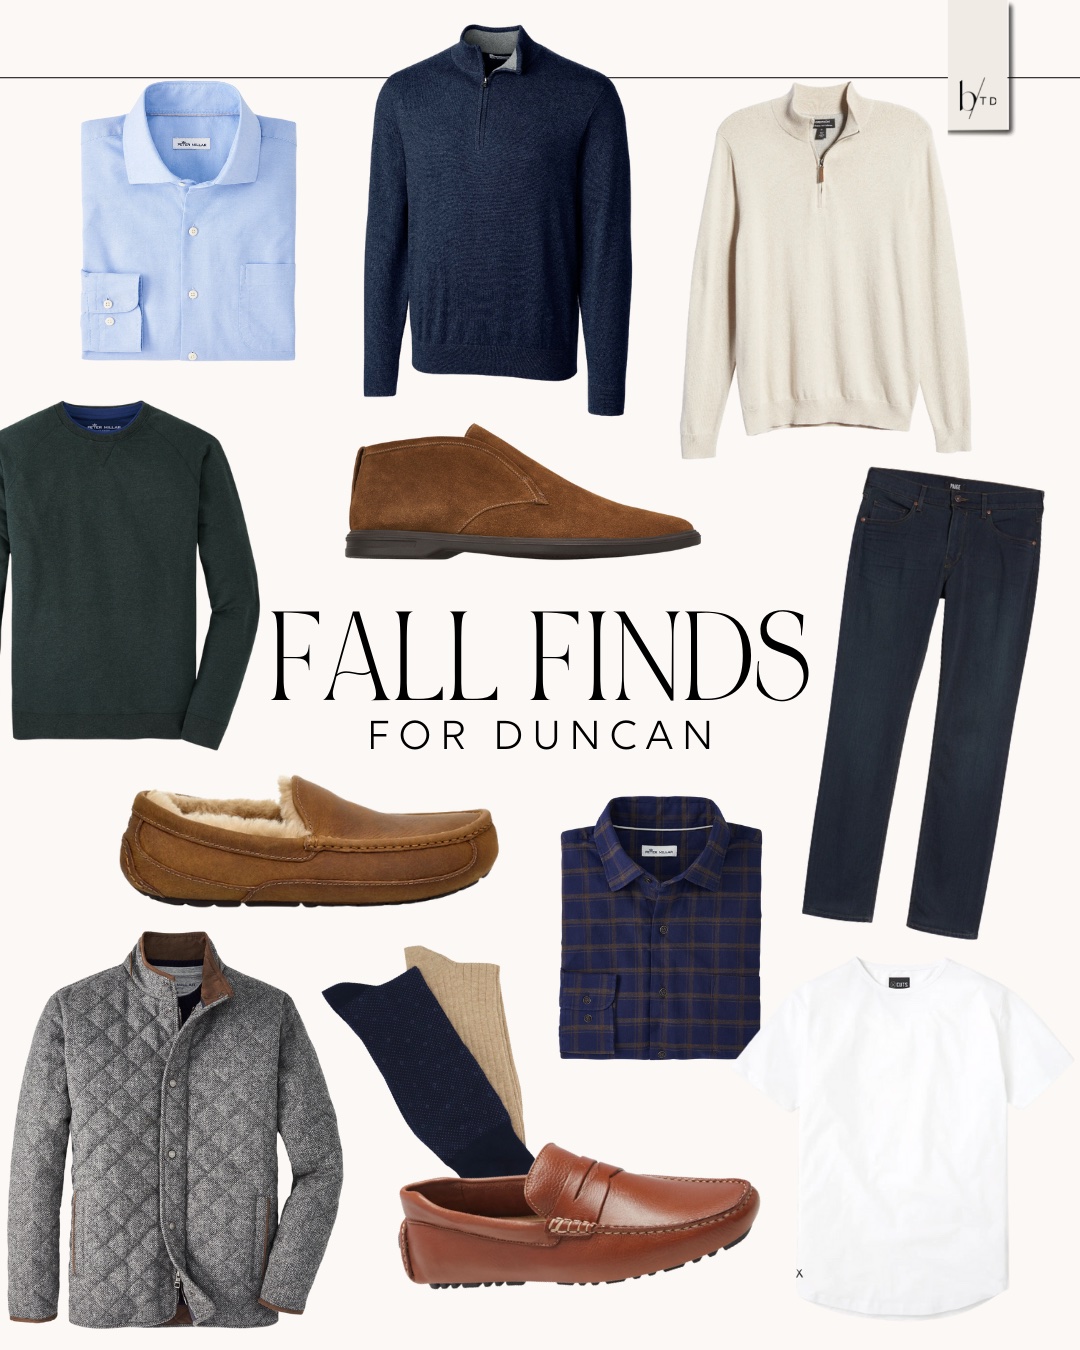 Brighton Butler Fall Finds For Duncan